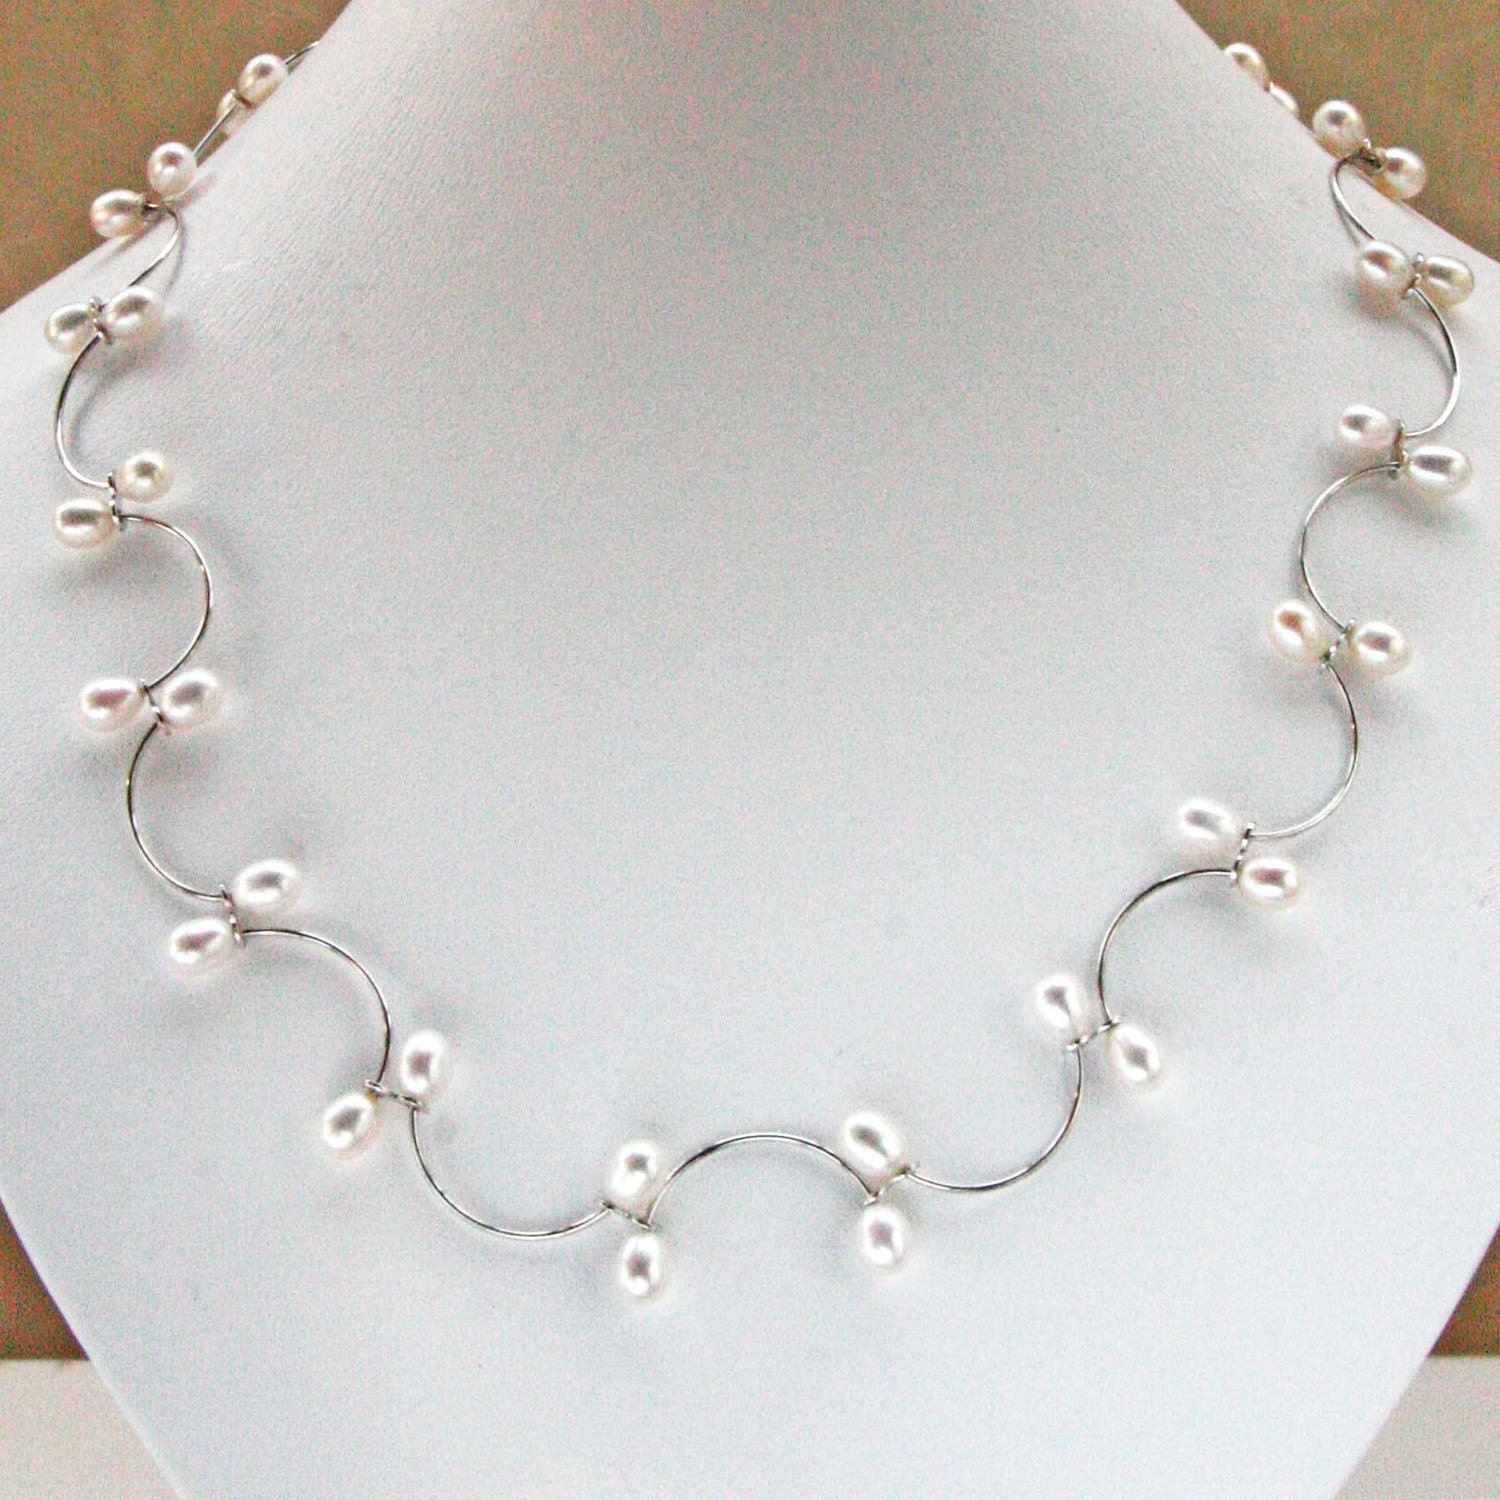 Romantic Pearl Necklace, Bracelet and Earrings